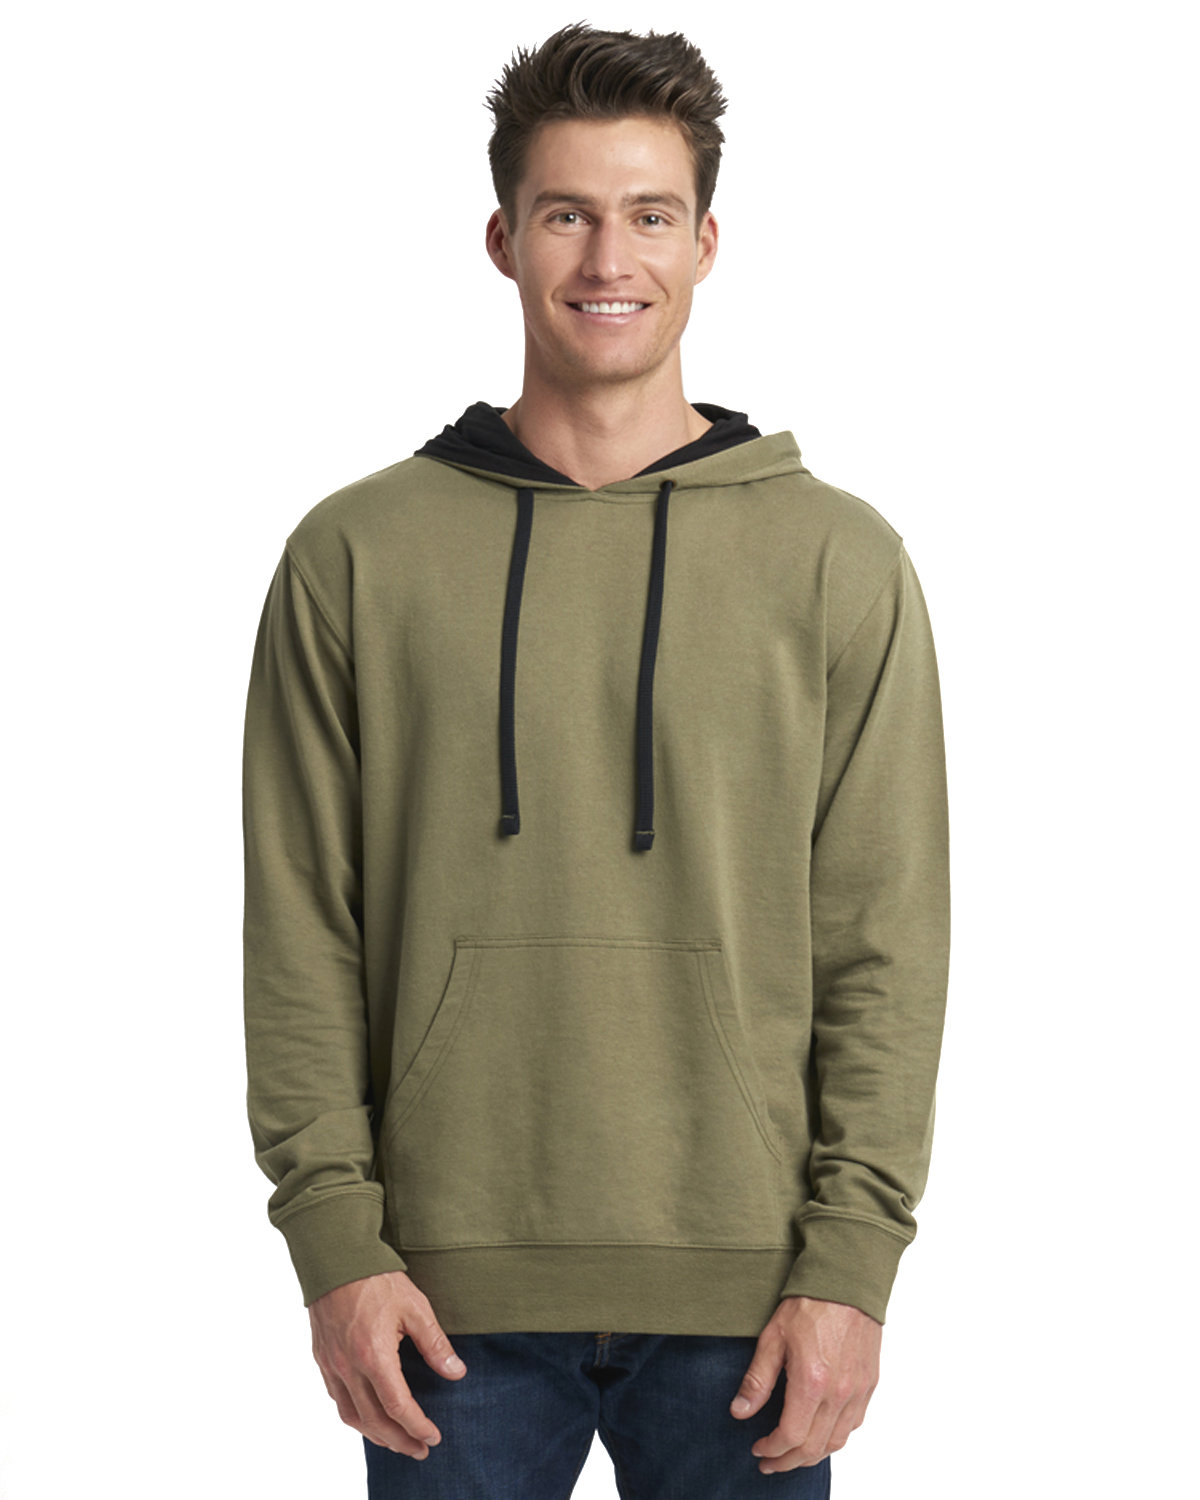 Next Level Apparel Unisex French Terry Pullover Hoodie MILTRY GRN/ BLK 